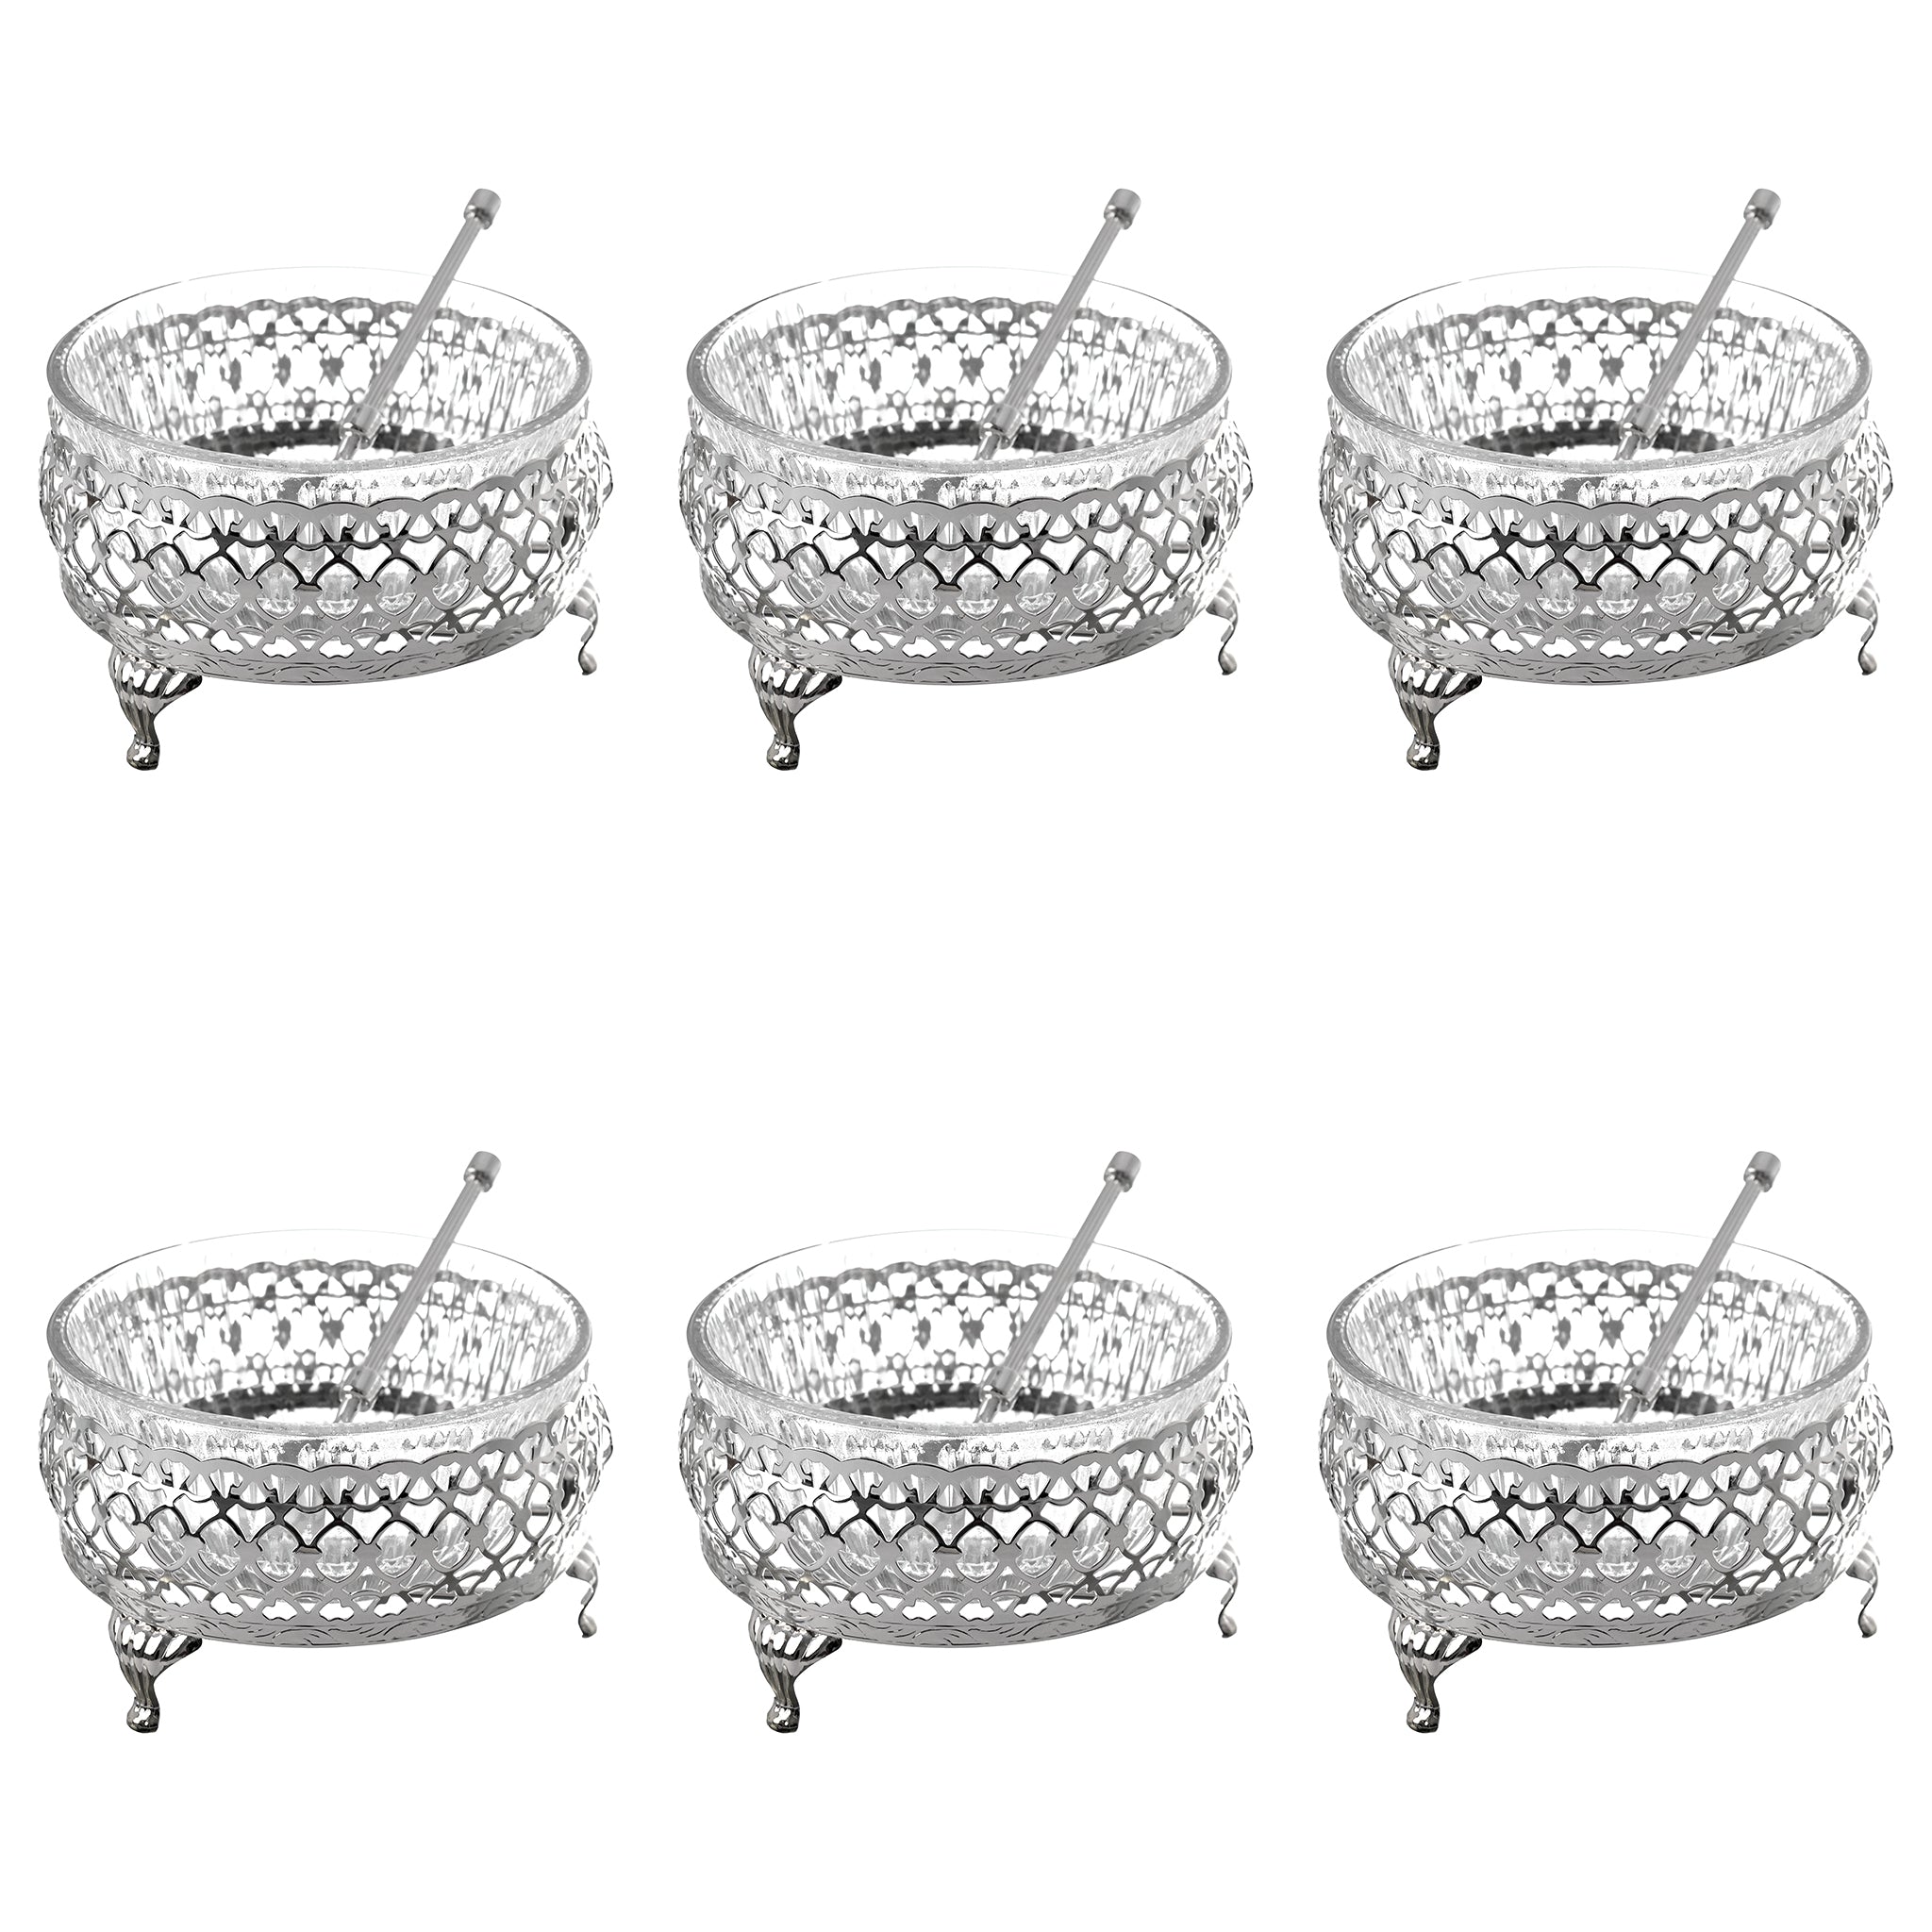 Queen Anne - Bowl Set with Dessert Spoons 6 Pieces - Silver Plated Metal with Glass - 26000374